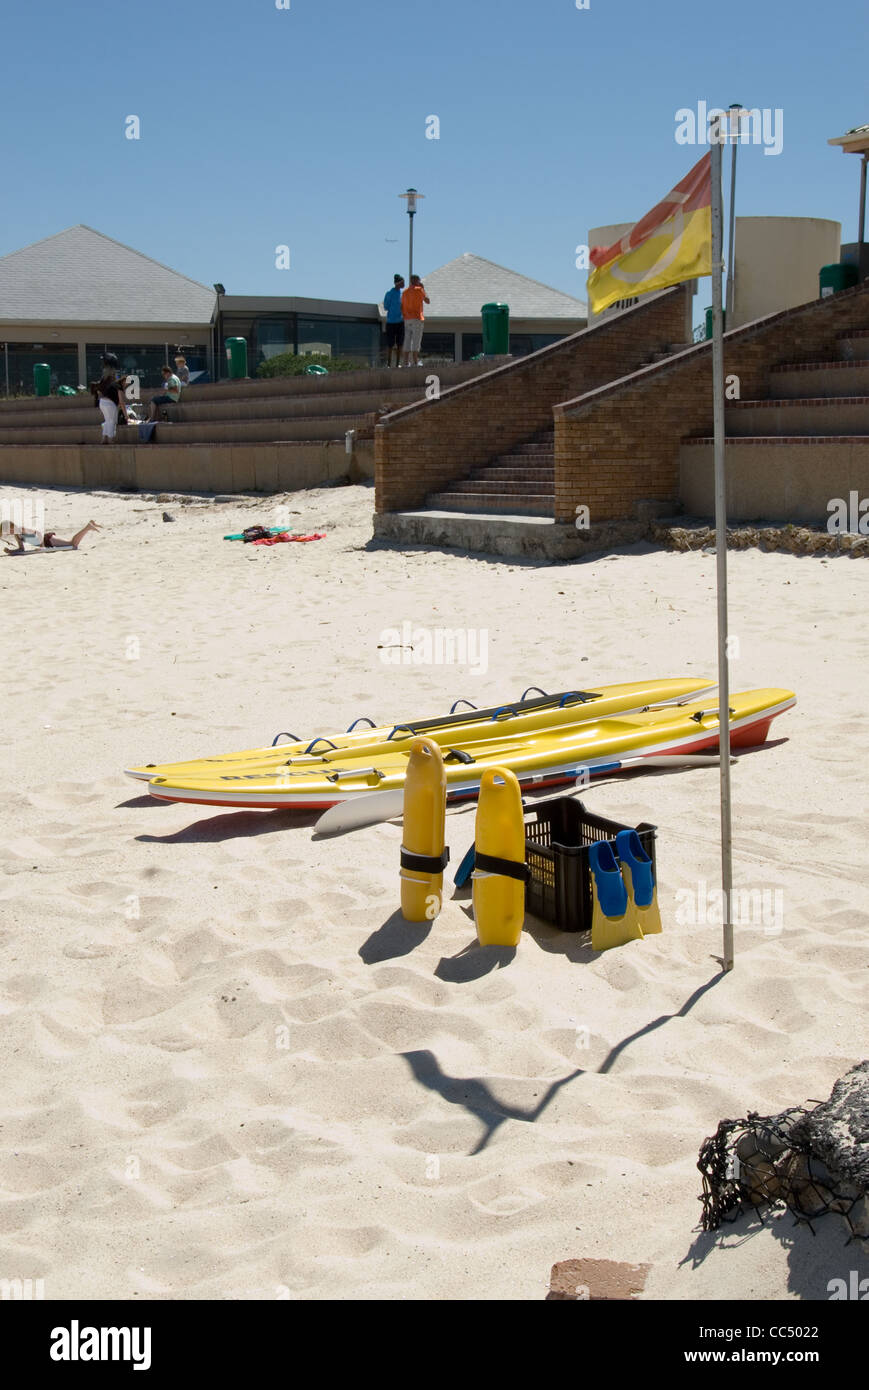 Lifeguard equipment on the beach in Milnerton Lighthouse, South Africa. Stock Photo